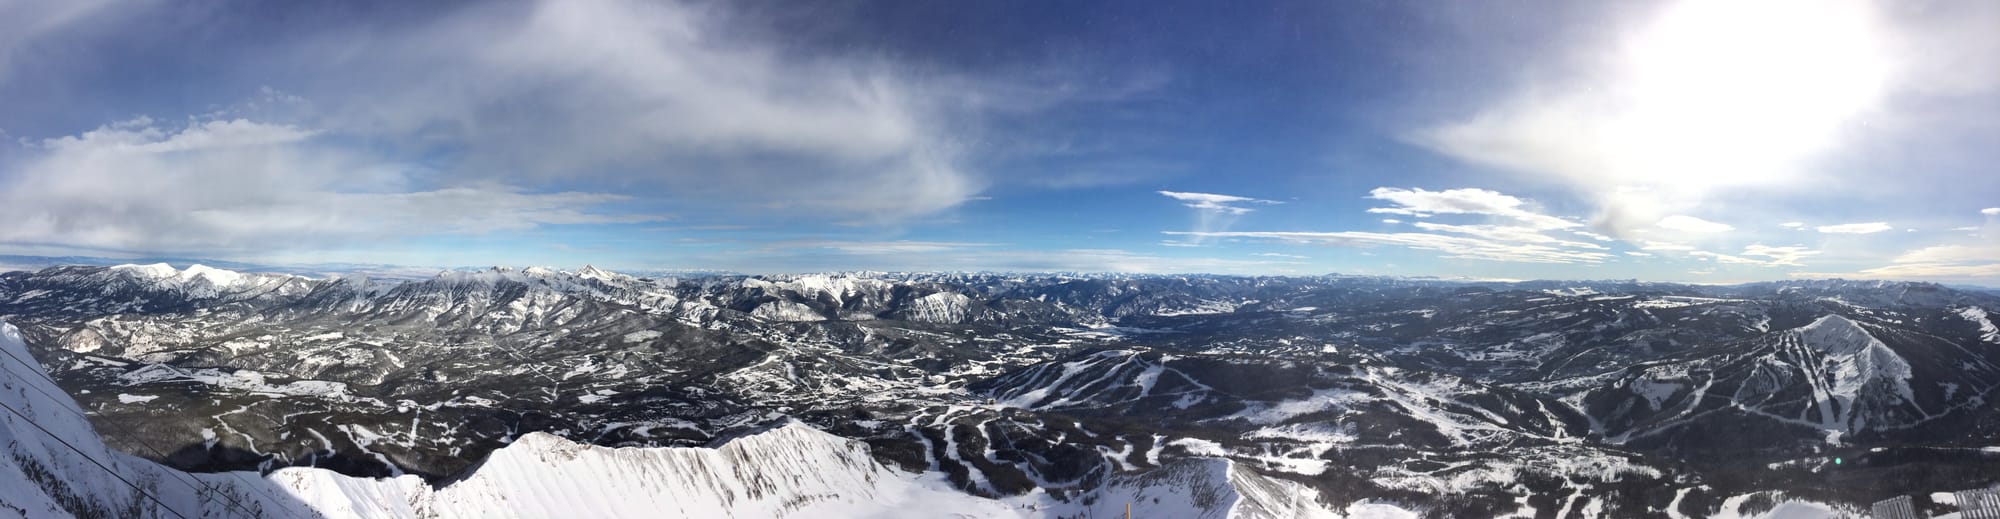 Photo by Author — view from Lone Mountain, Big Sky, Montana